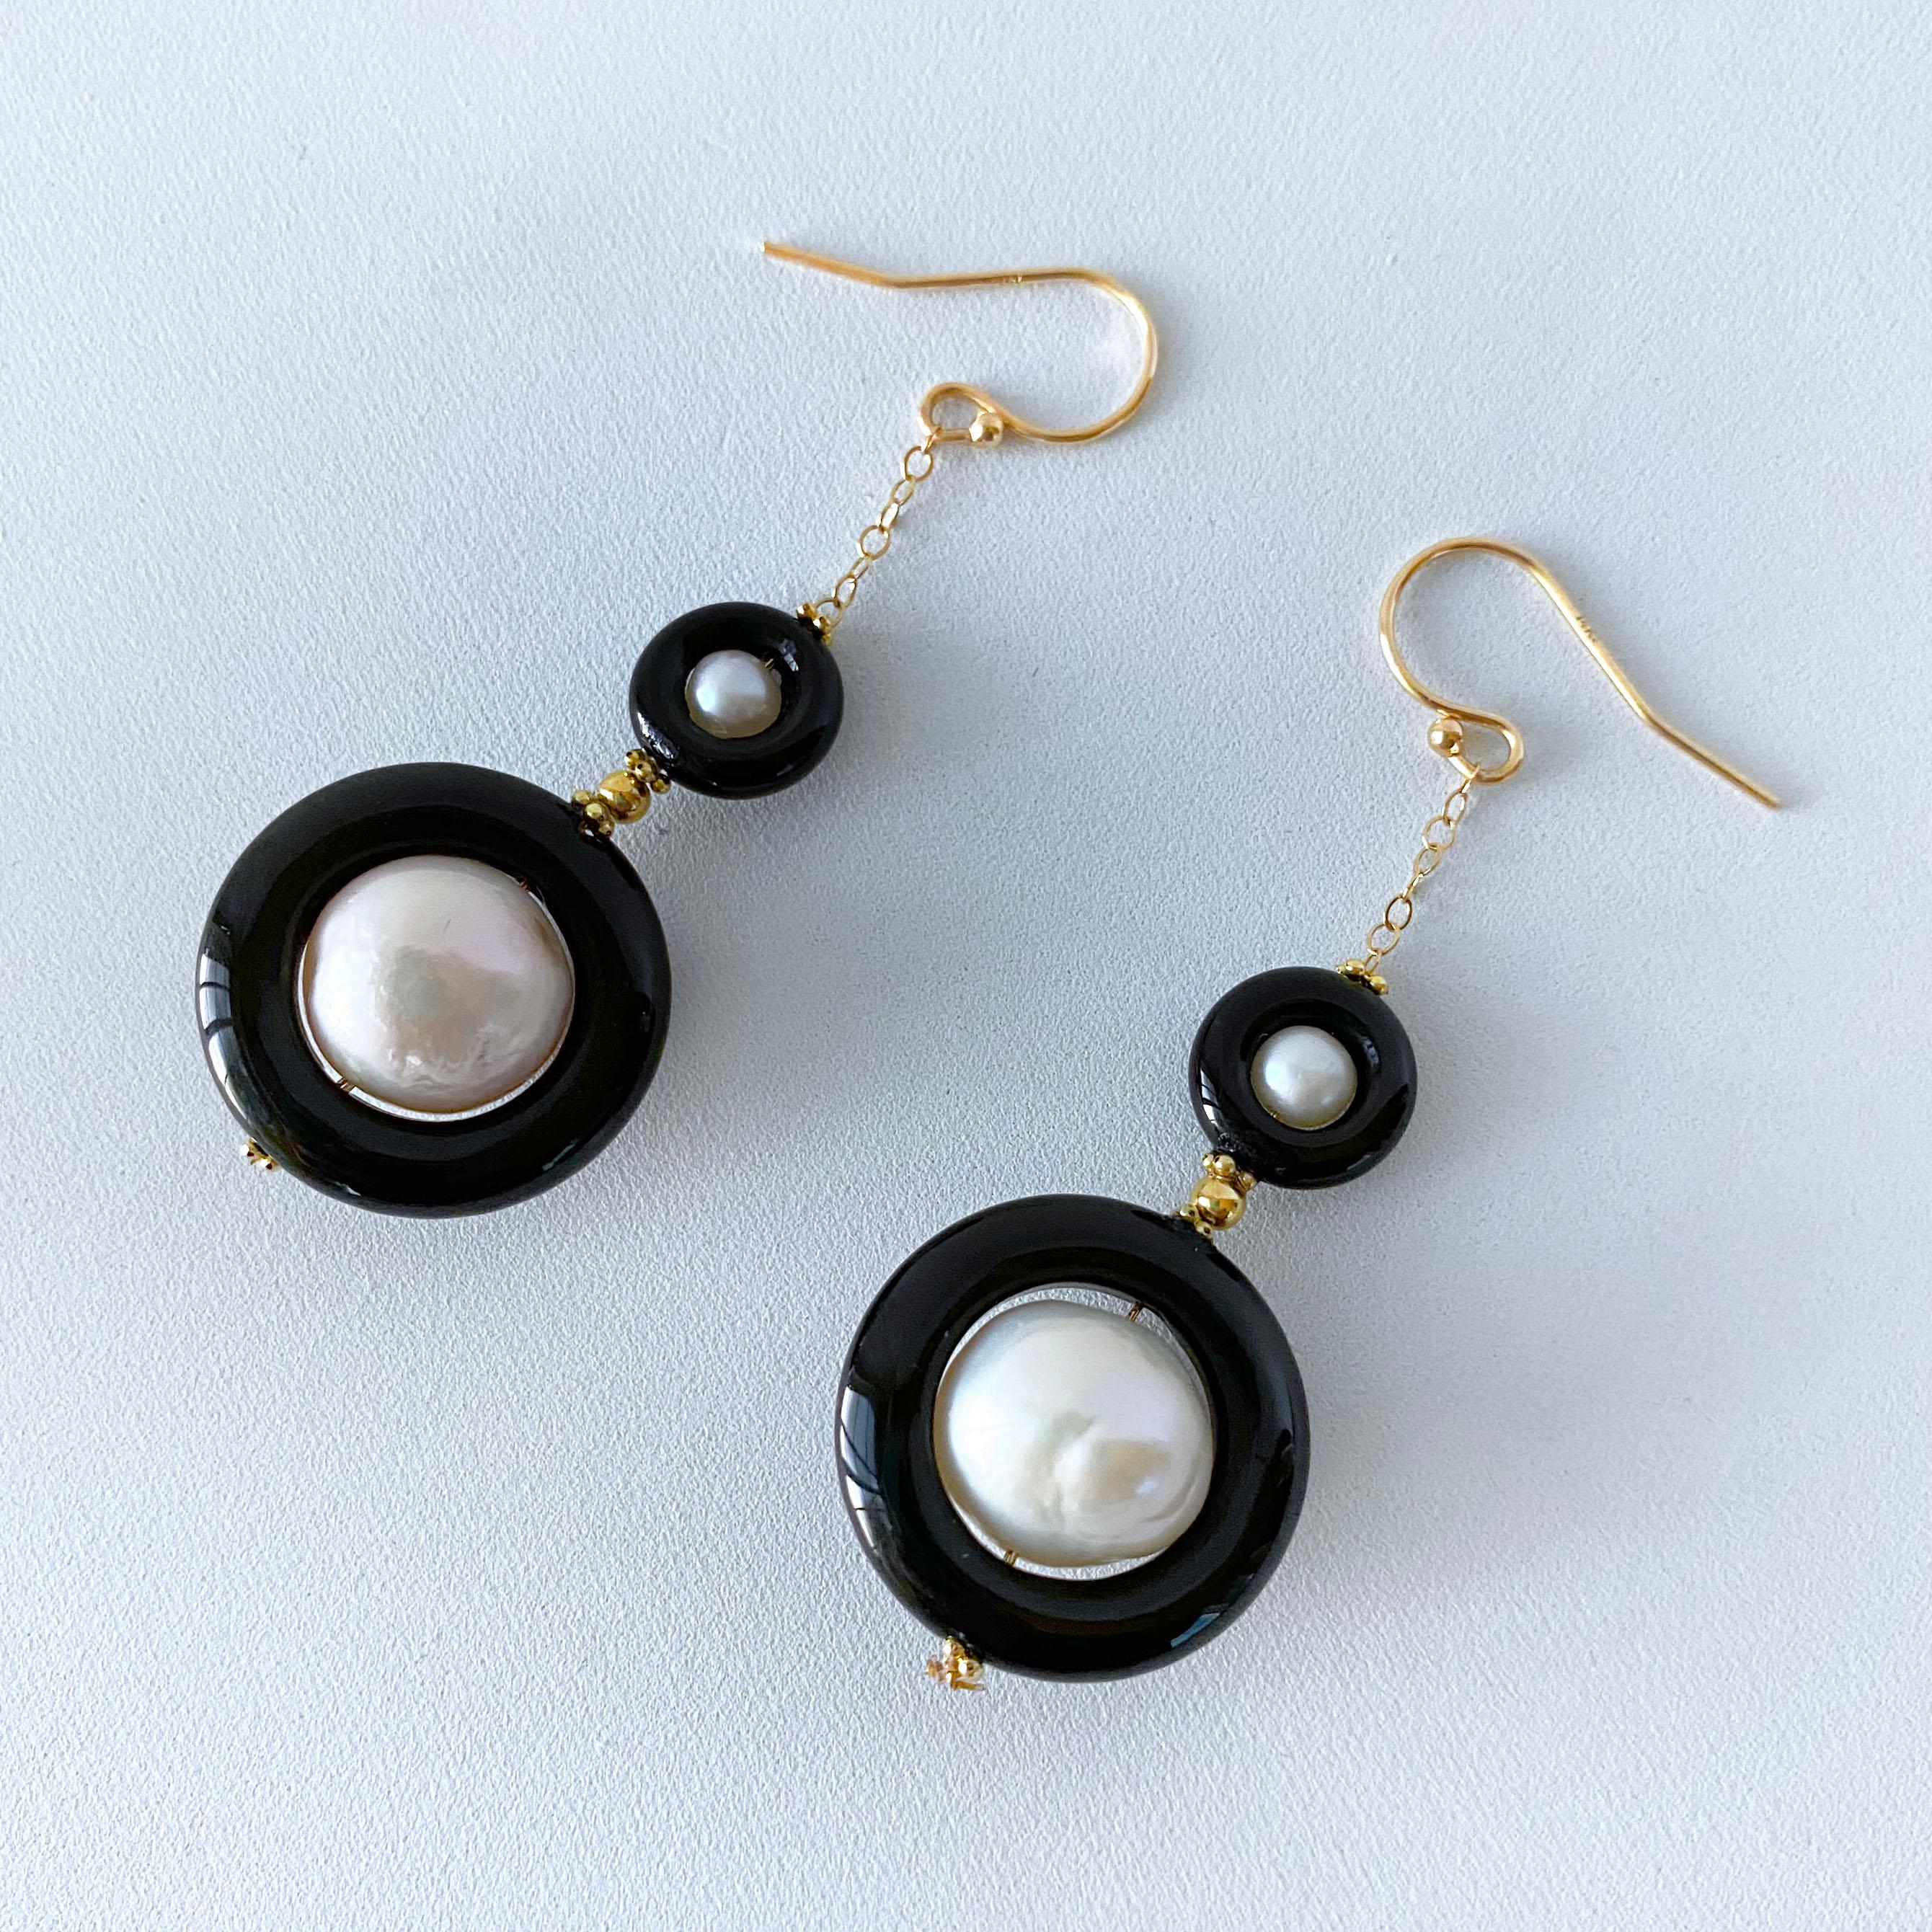 Marina J. 2 Tier Pearl, Black Onyx and Solid 14k Yellow Gold Earrings  In New Condition For Sale In Los Angeles, CA